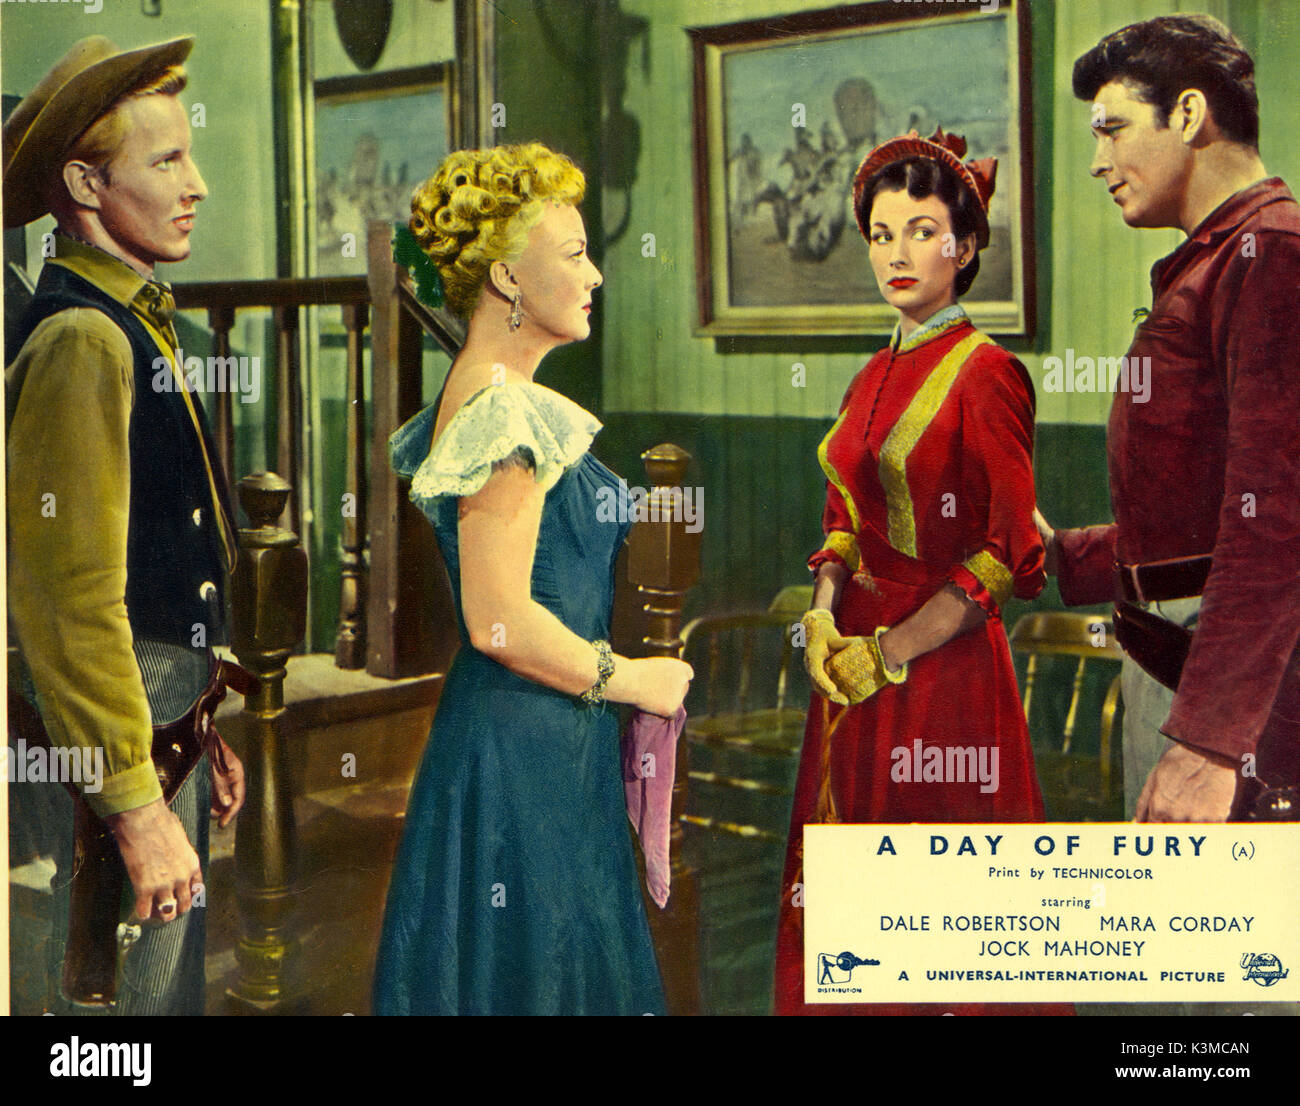 A DAY OF FURY [US 1956] JAN MERLIN, SHEILA BROMLEY, MARA CORDAY, DALE ROBERTSON     Date: 1956 Stock Photo